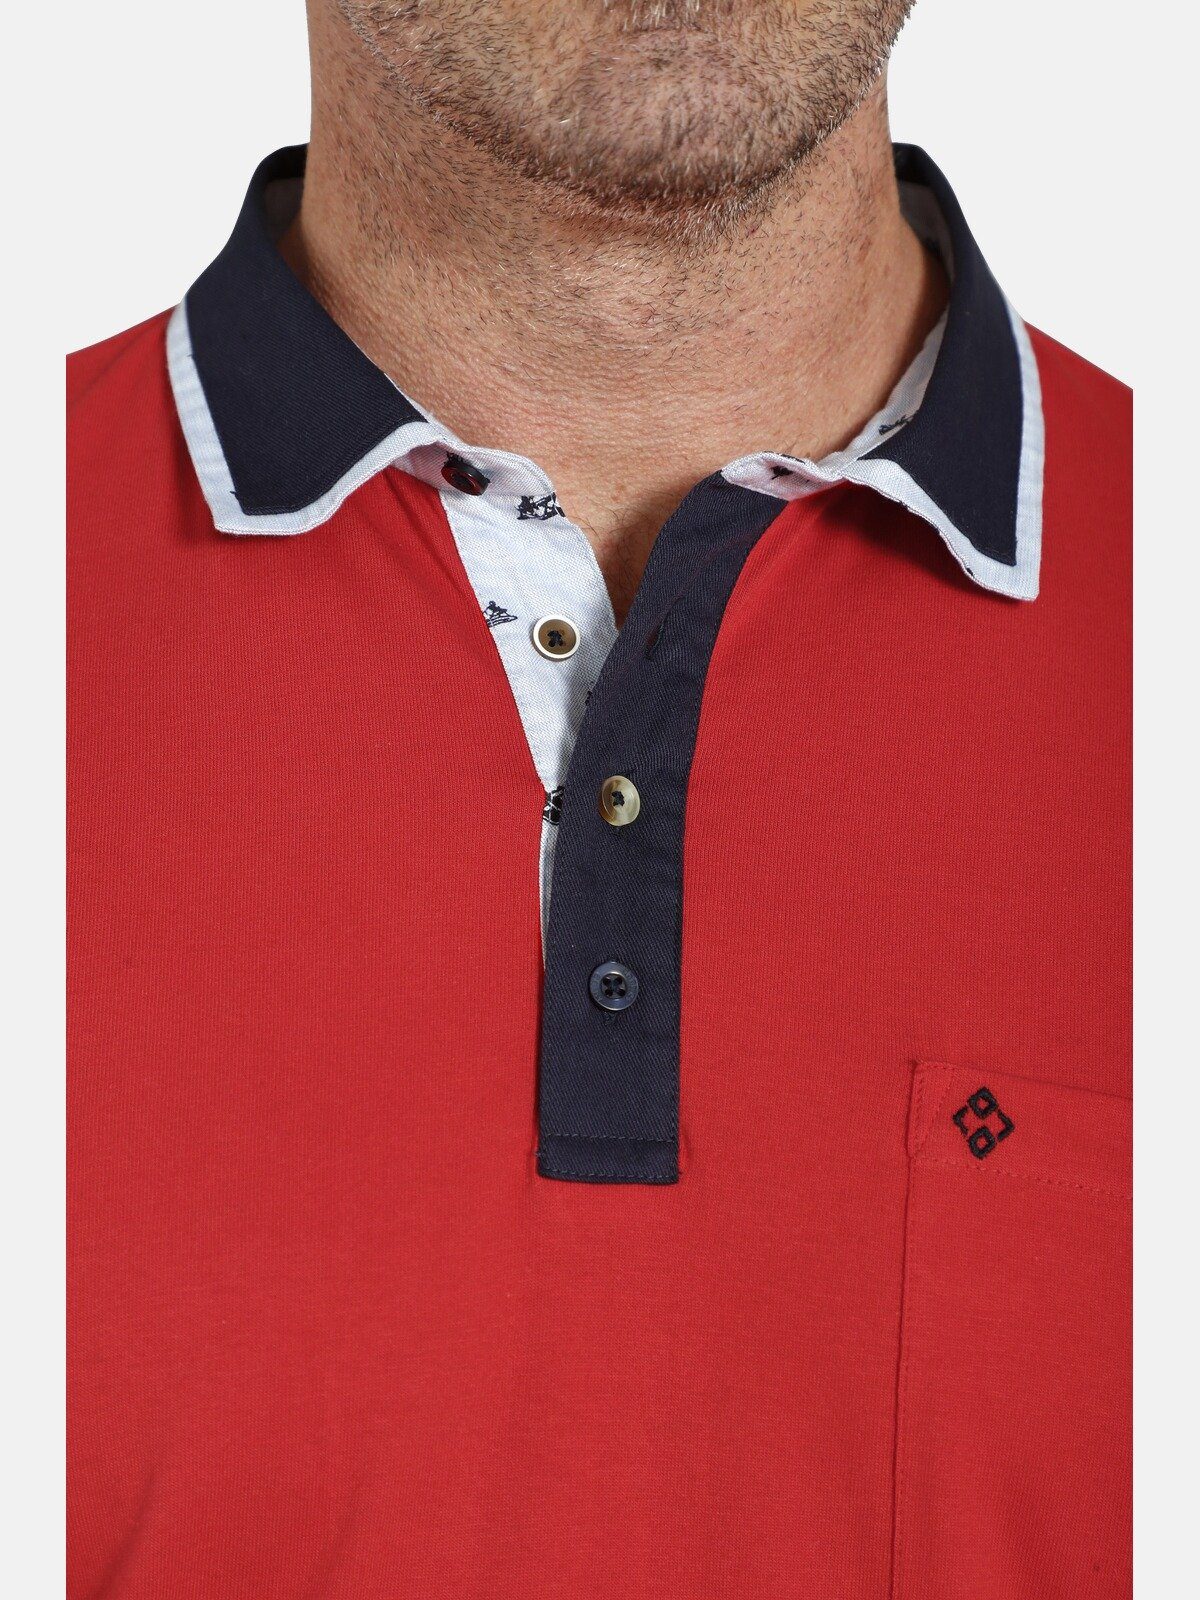 Charles Colby EARL Poloshirt Details SPENCER stylische Chambray in